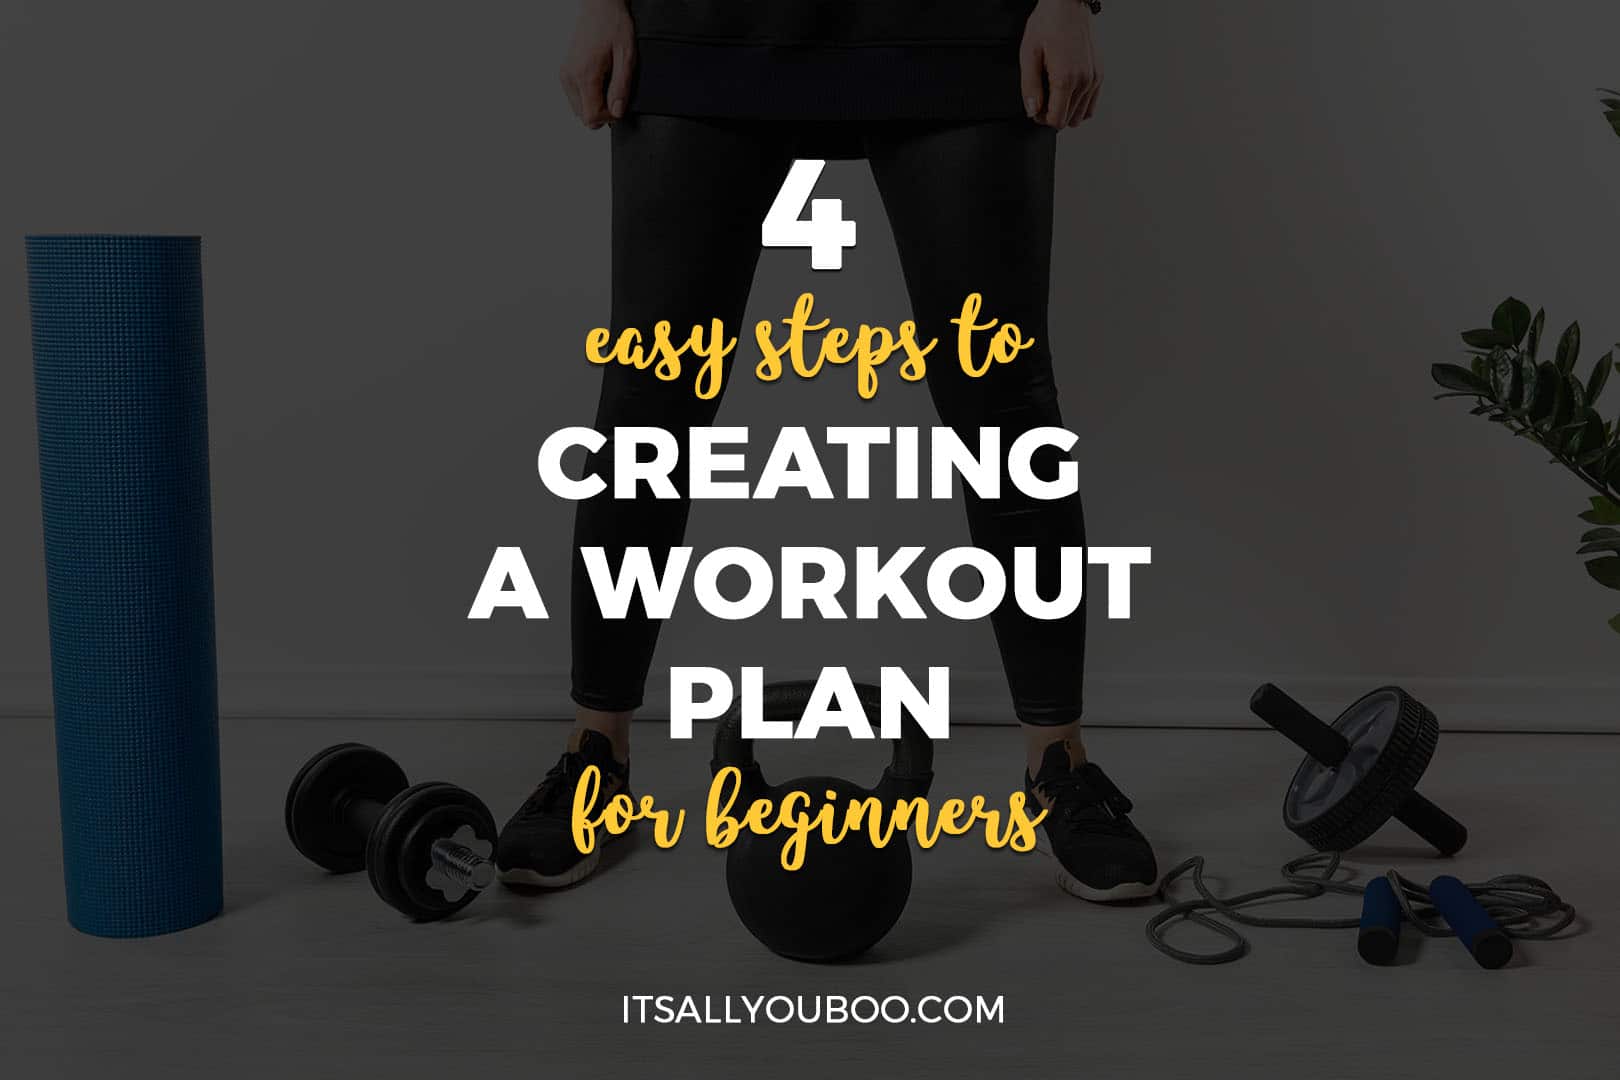 4 Easy Steps to Creating a Workout Plan for Beginners